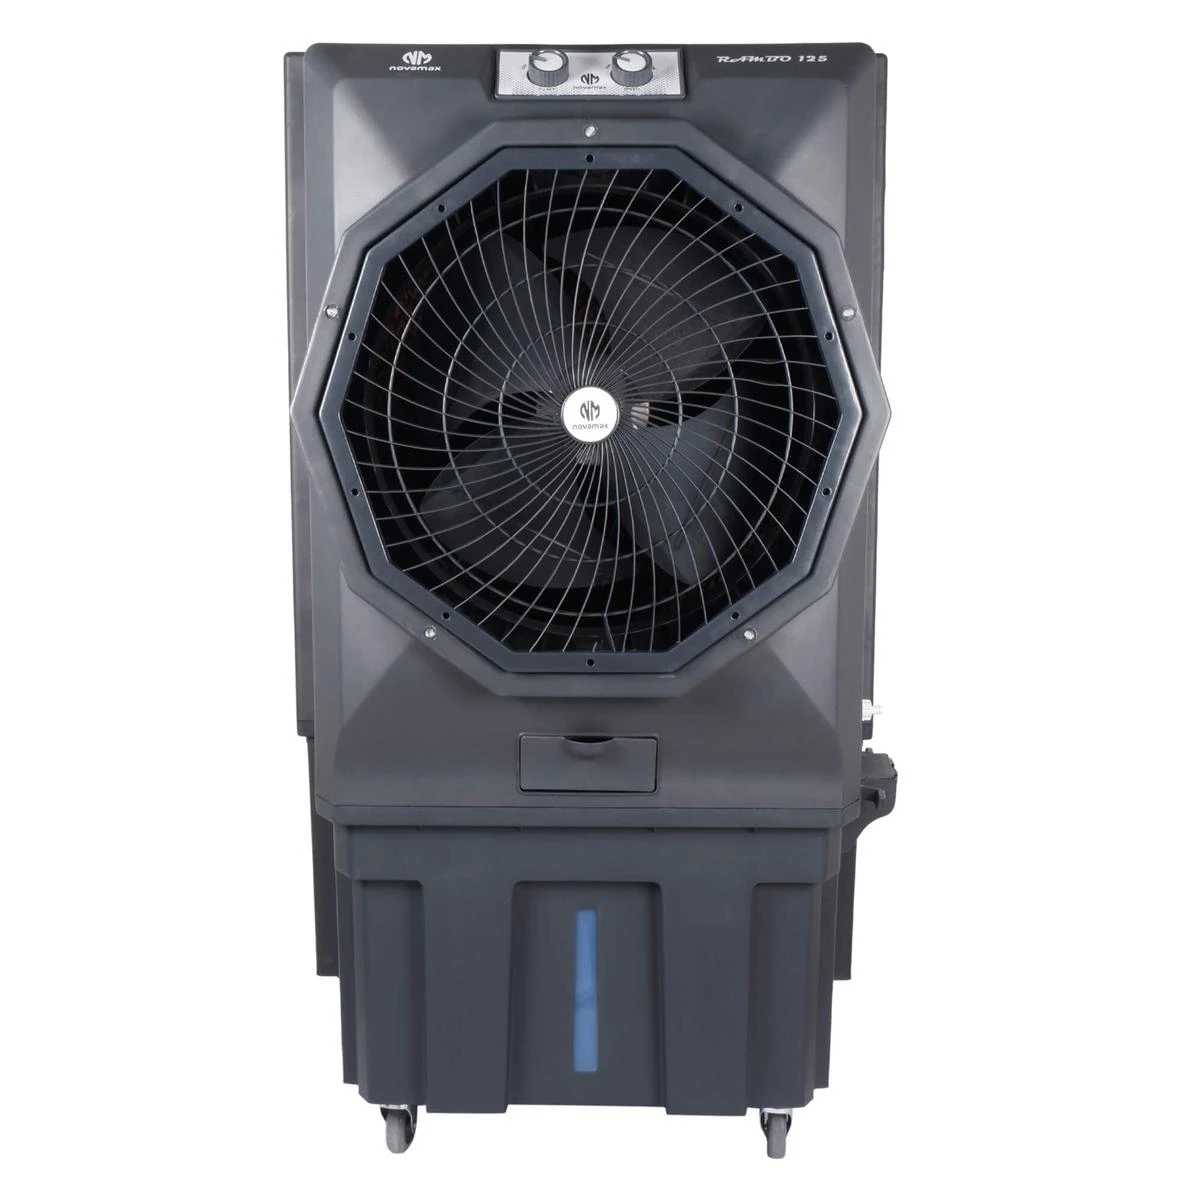 Novamax RAMBO 125 L Commercial Air Cooler (Grey, Rambo With Honeycomb Cooling Technology)